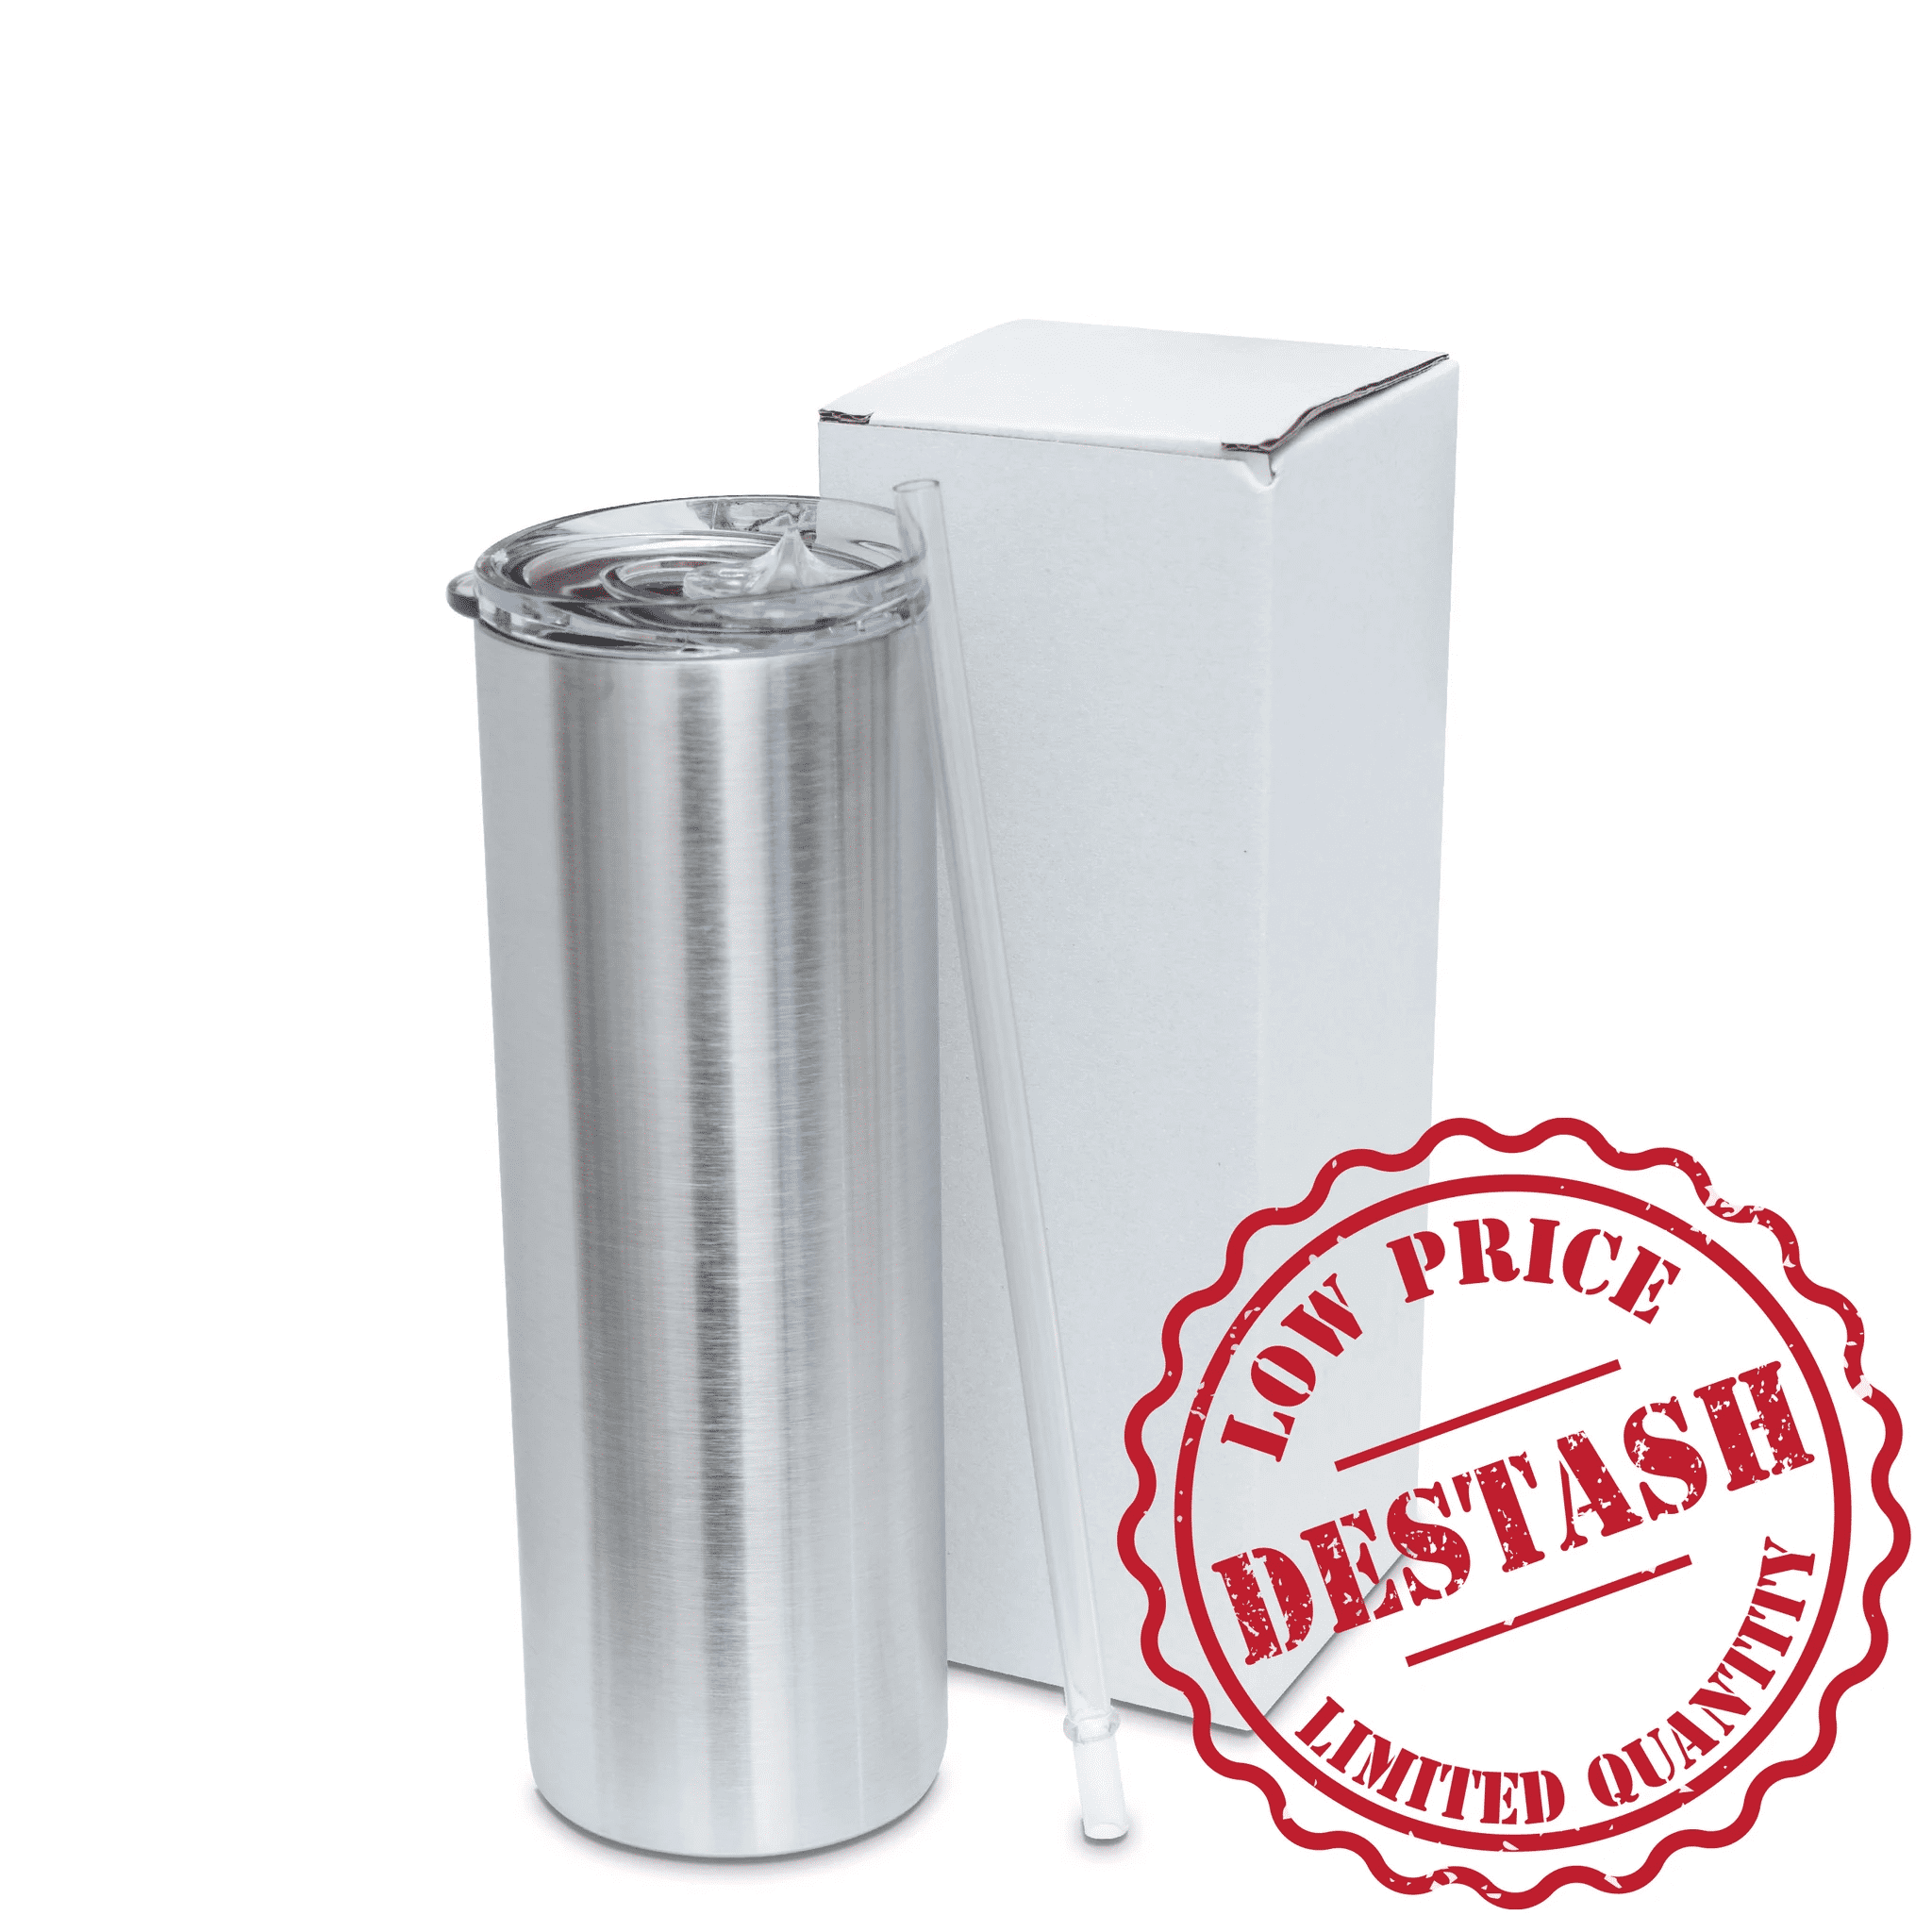 MakerFlo Destash 20 oz, 25 Pack Skinny Insulated Tumblers, Stainless Steel, Silver